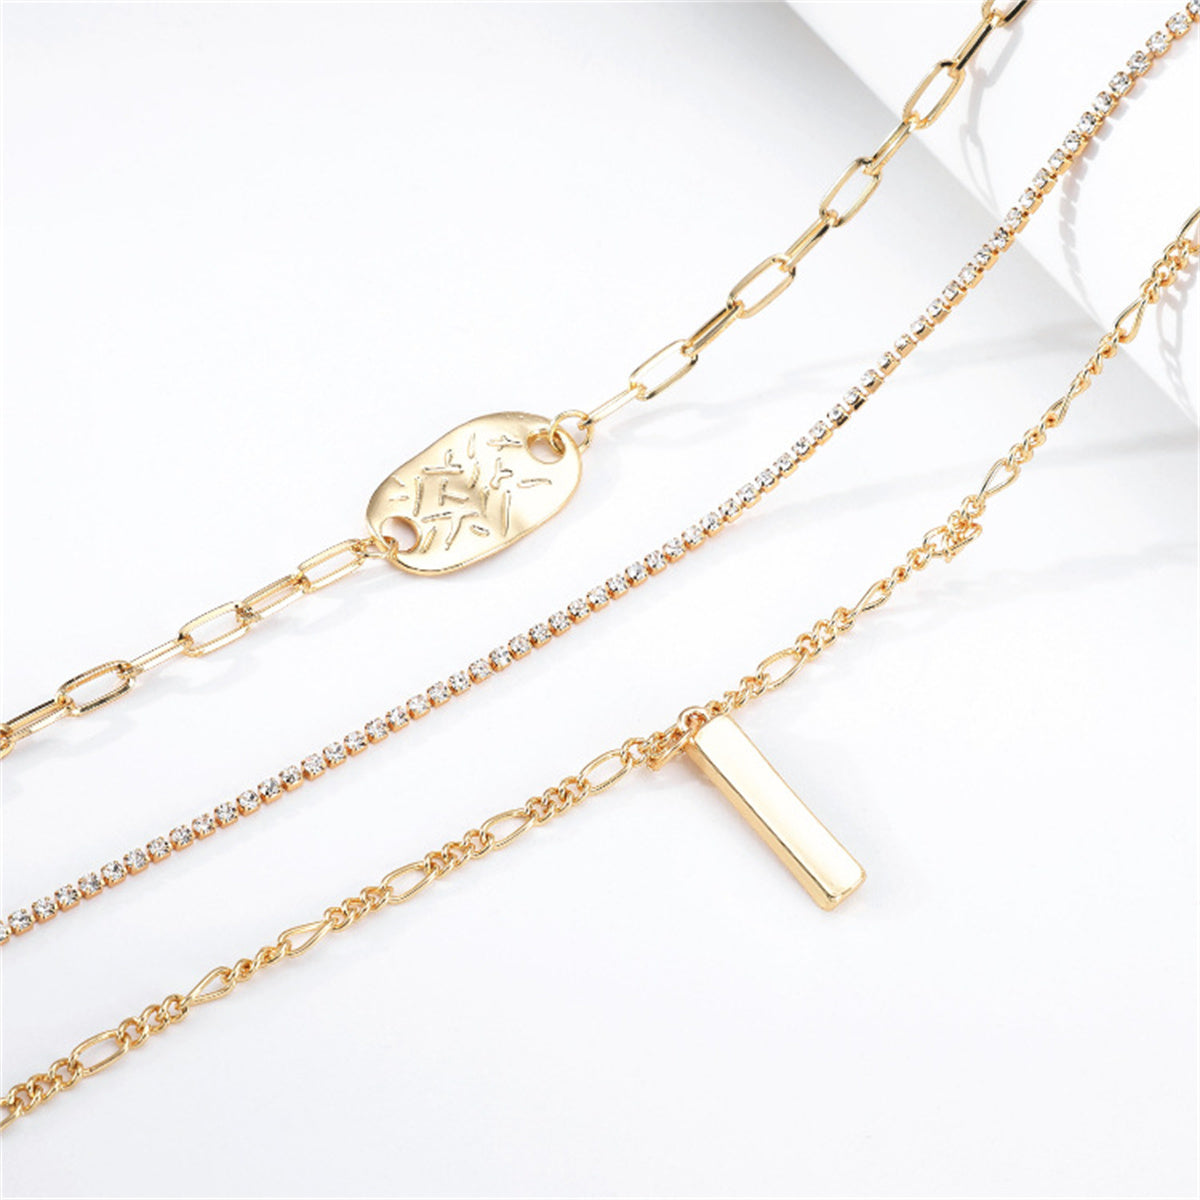 Cubic Zirconia & 18K Gold-Plated Layered Bar Pendant Necklace